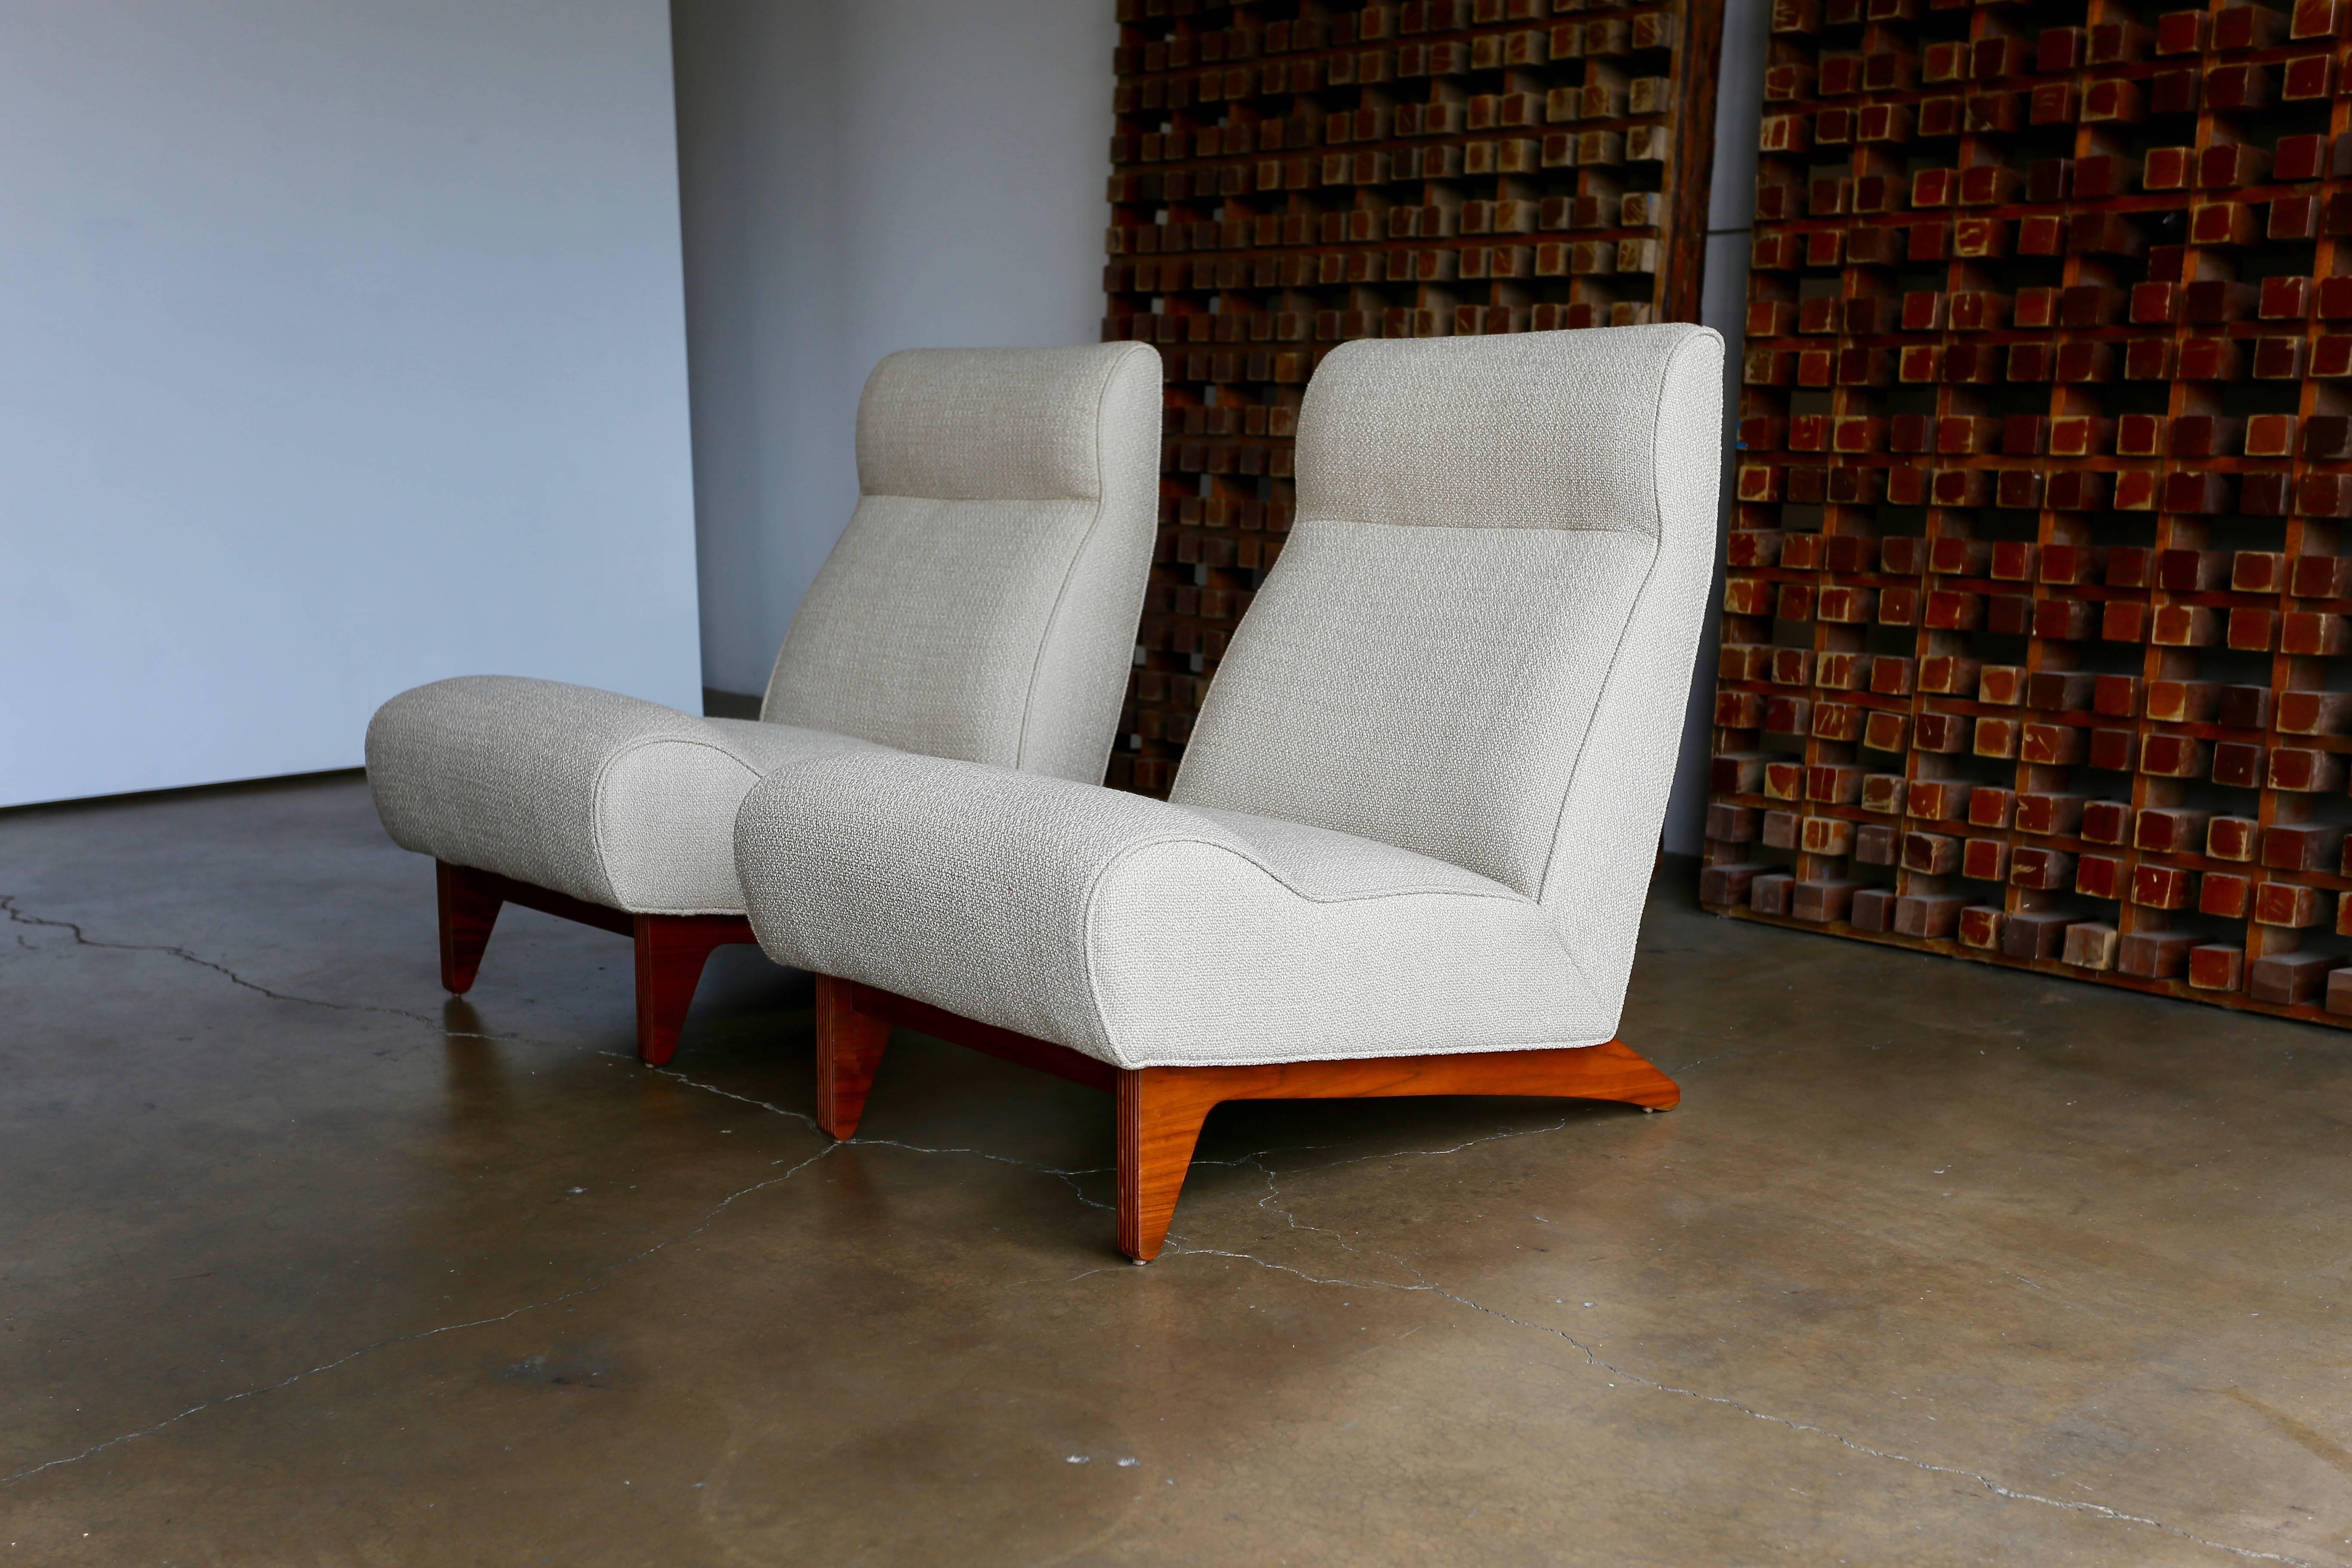 Rare pair of lounge chairs by Edward Wormley for Dunbar. This pair has been professionally restored.